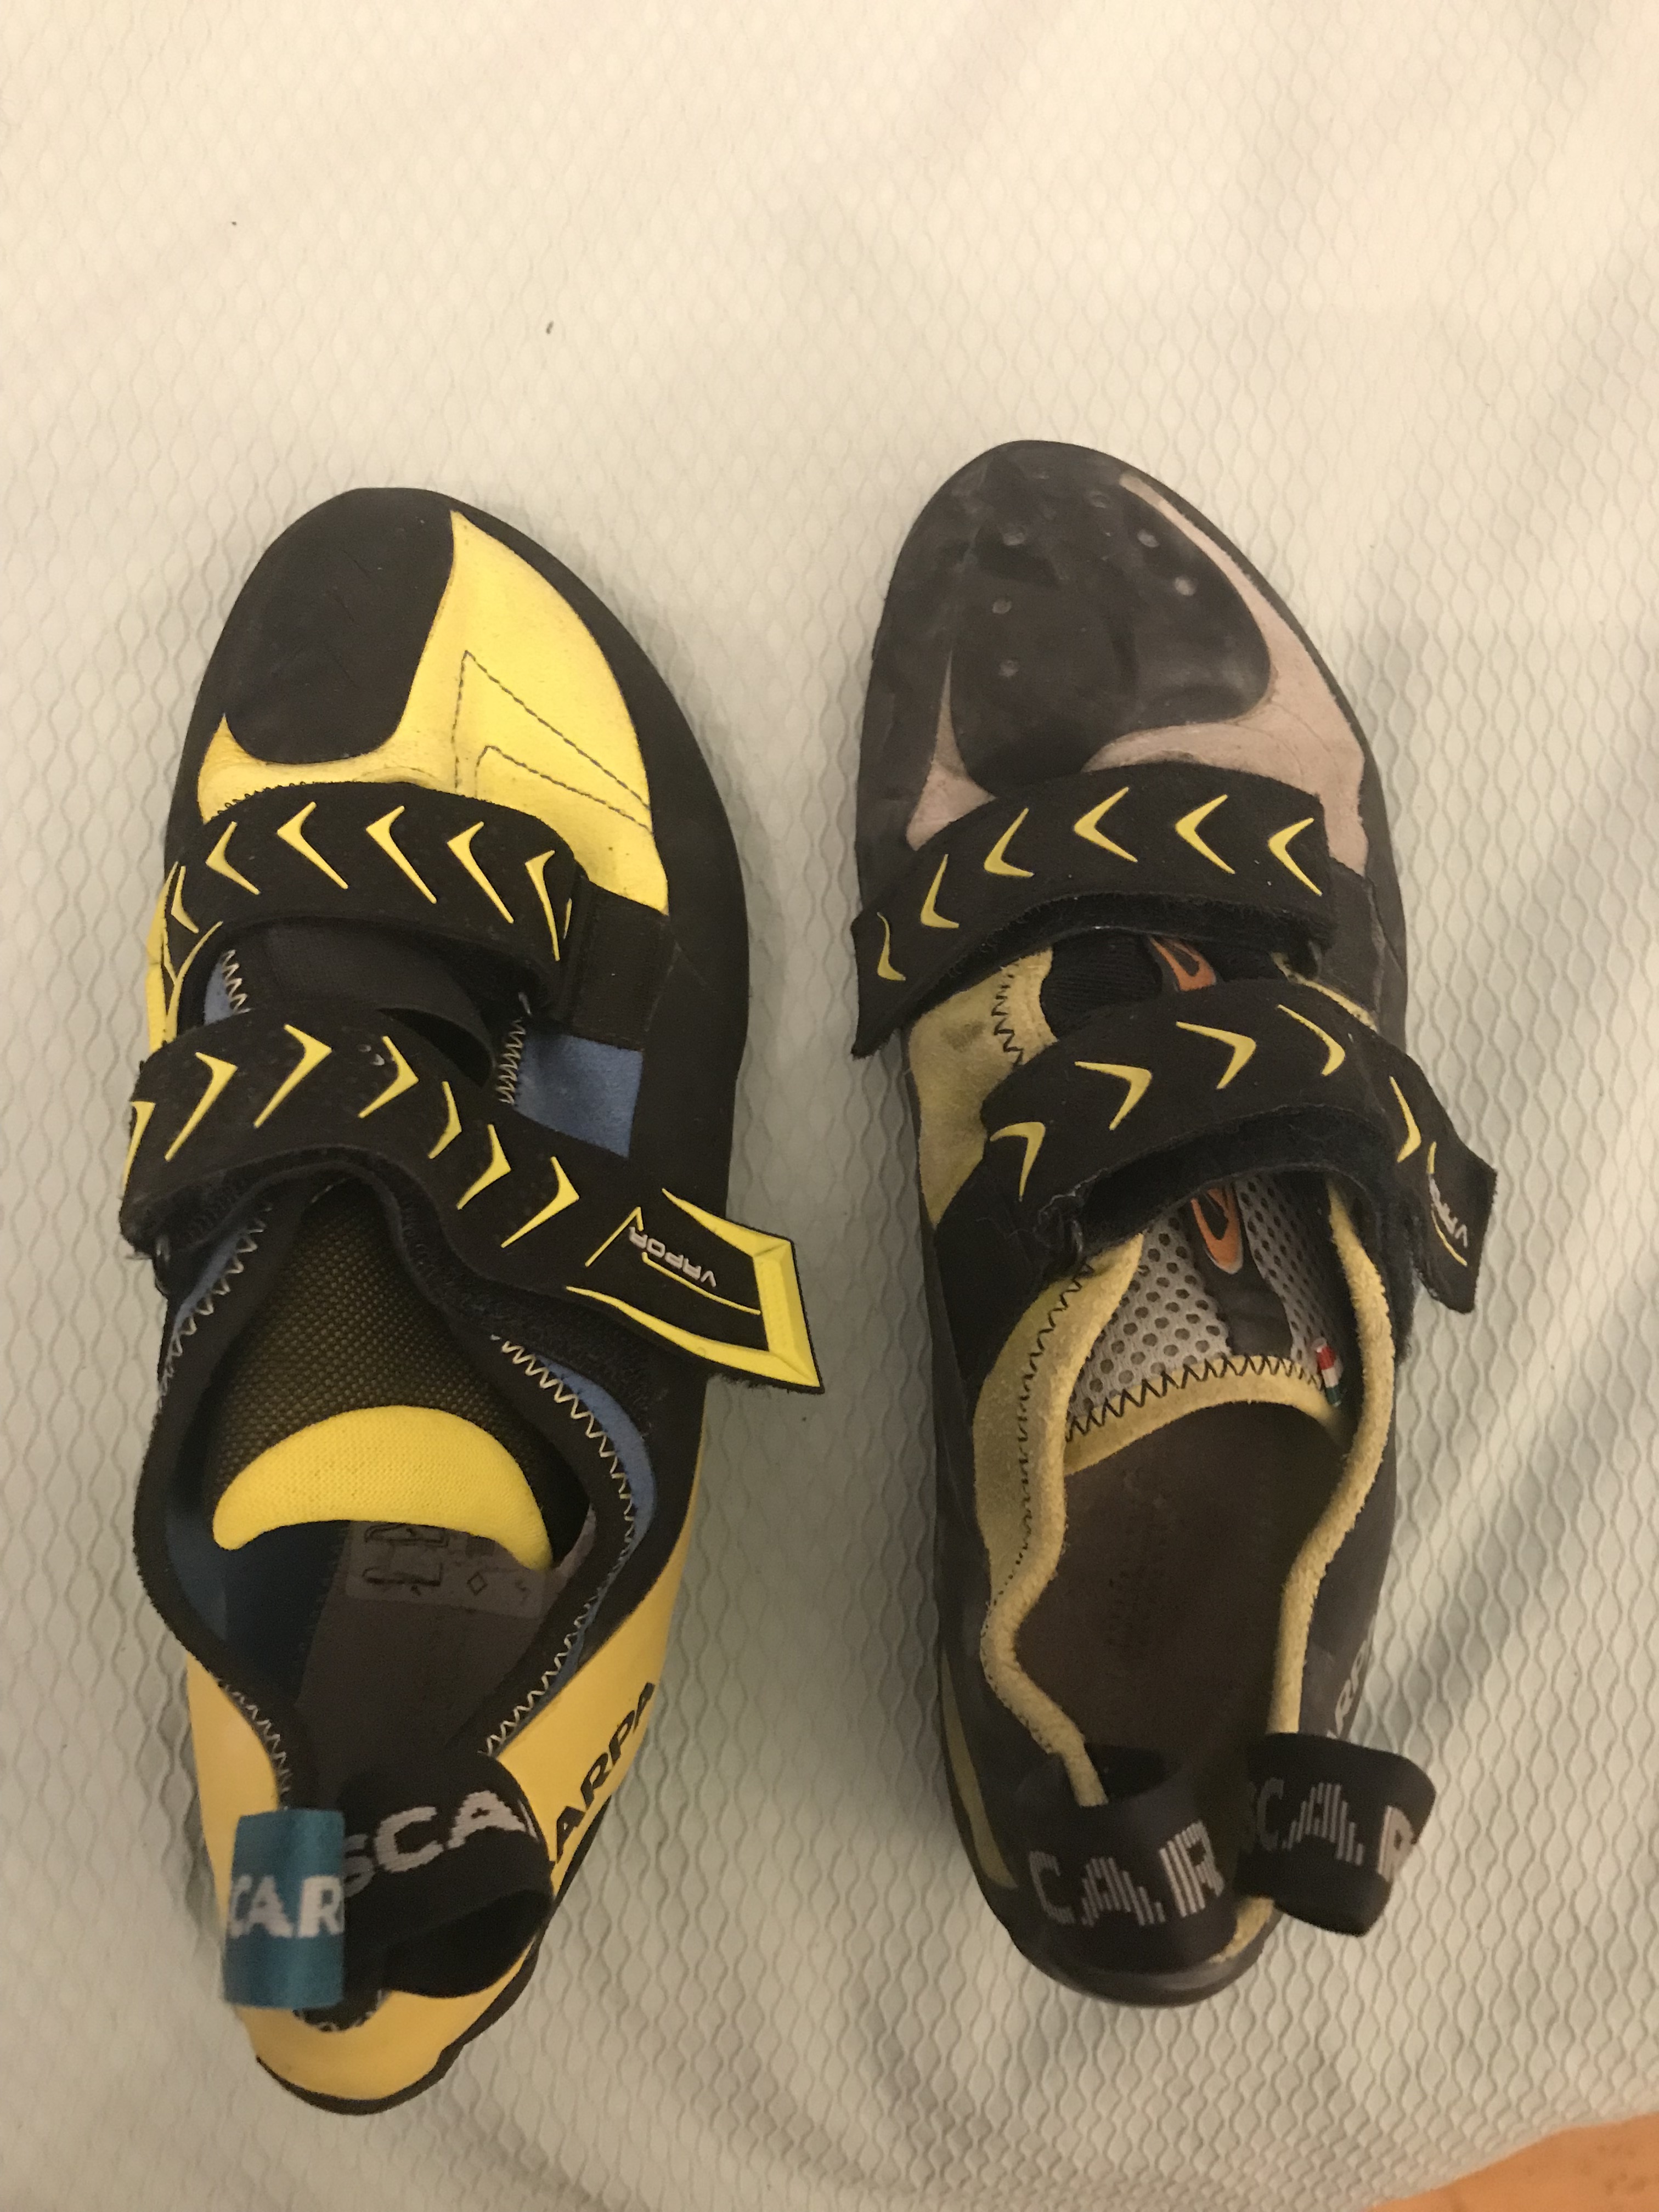 Scarpa Vapour S: Truly Special? 